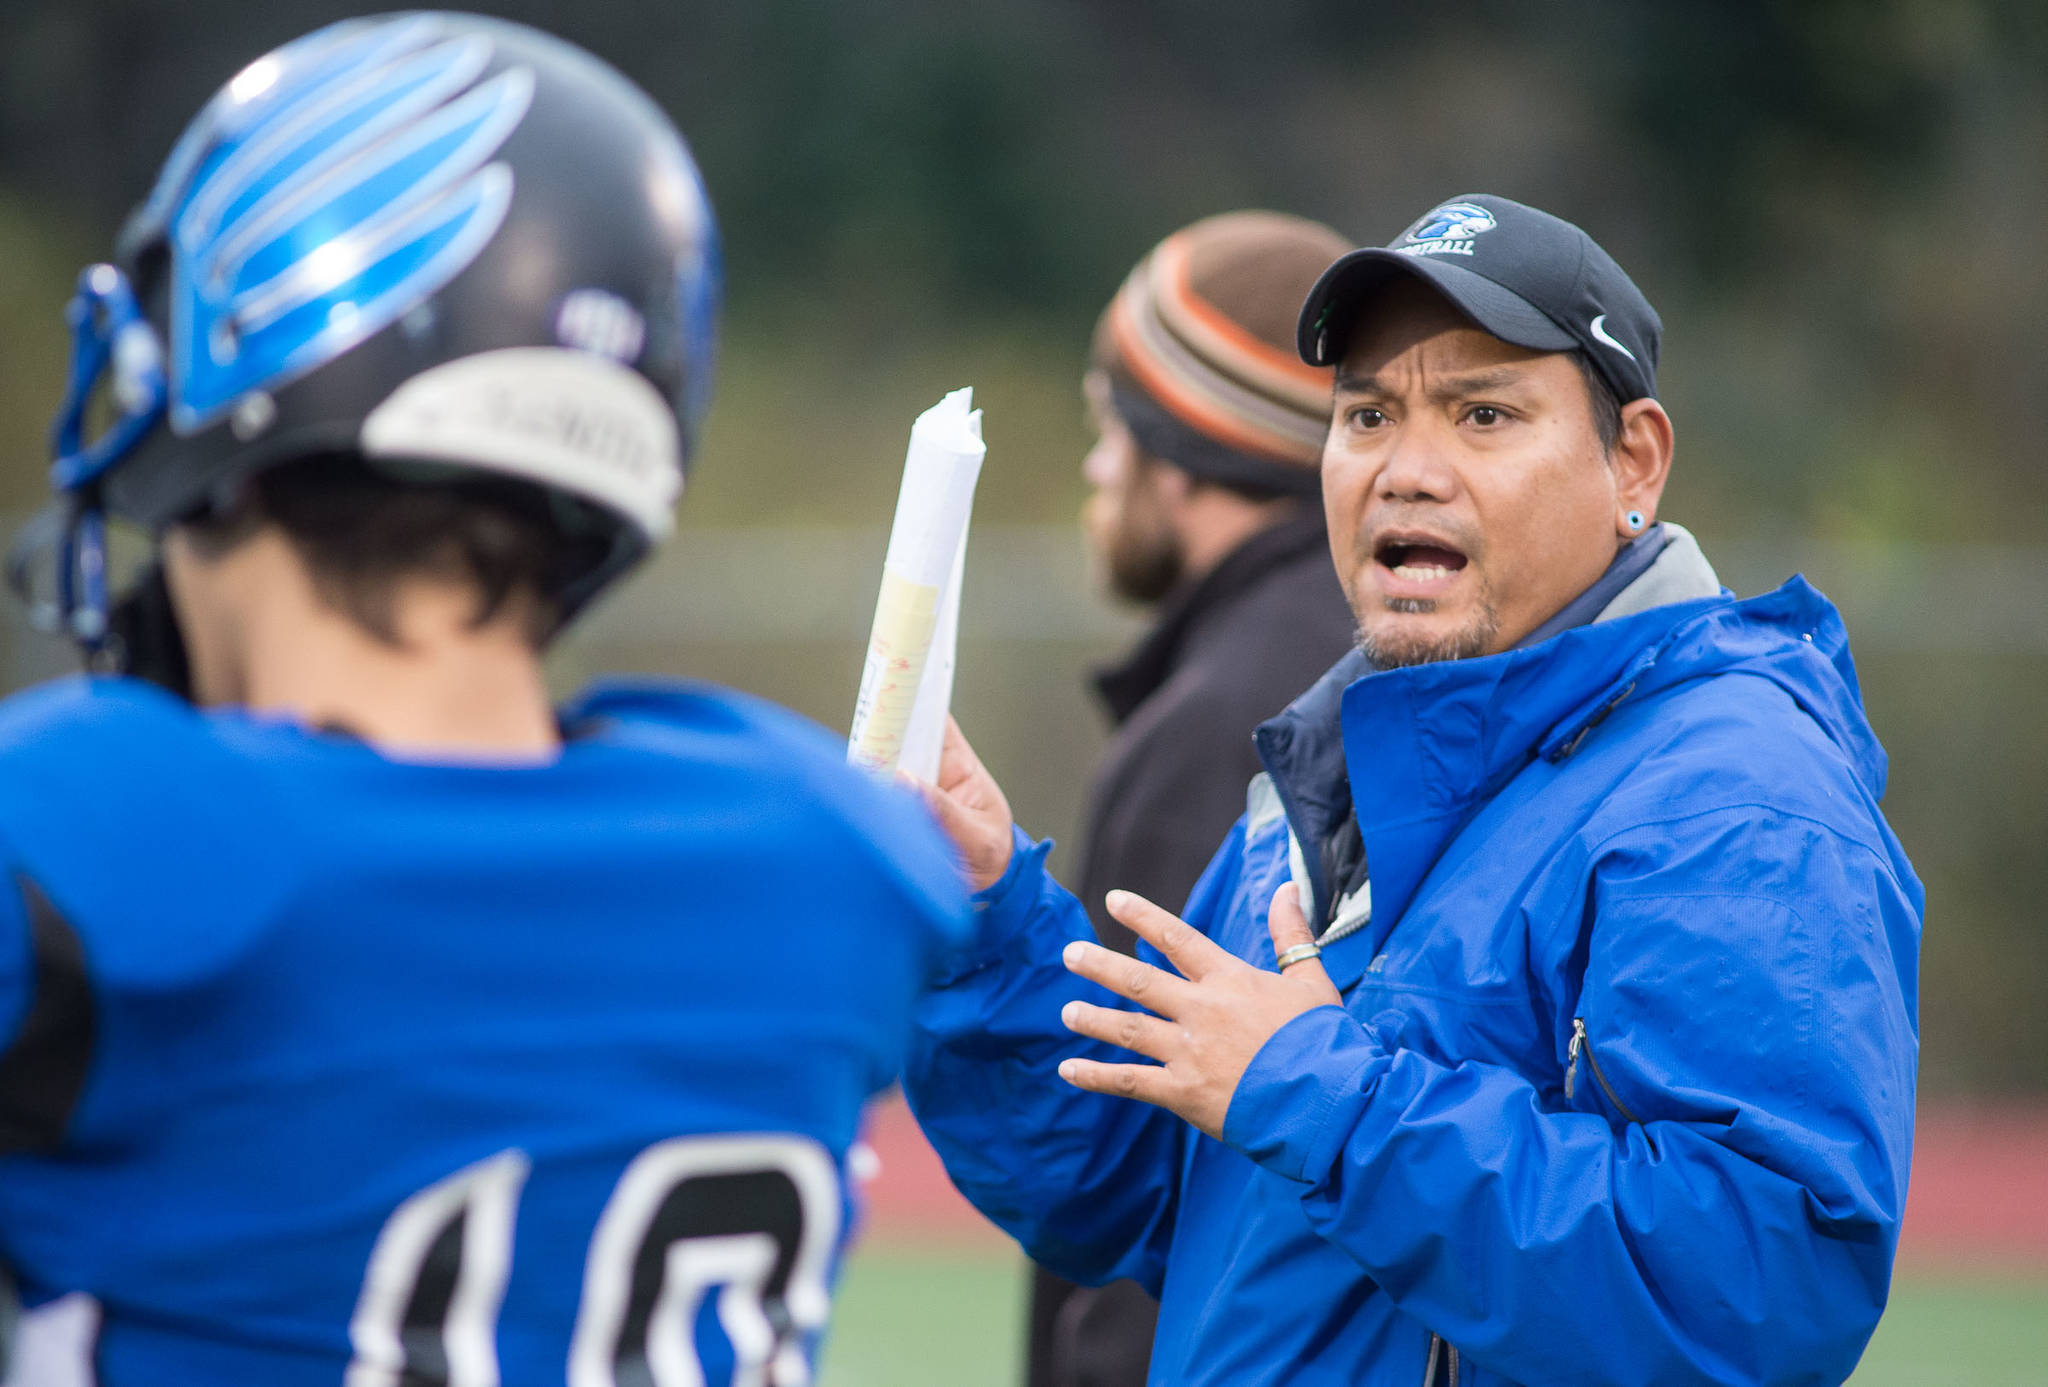 TMHS coach Randy Quinto works with his team at Thunder Mountain High School football practice at TMHS on Wednesday, Oct. 4, 2017. Quinto was the TMHS head coach from 2015-17 and Juneau United head coach last season. (Michael Penn | Juneau Empire File)